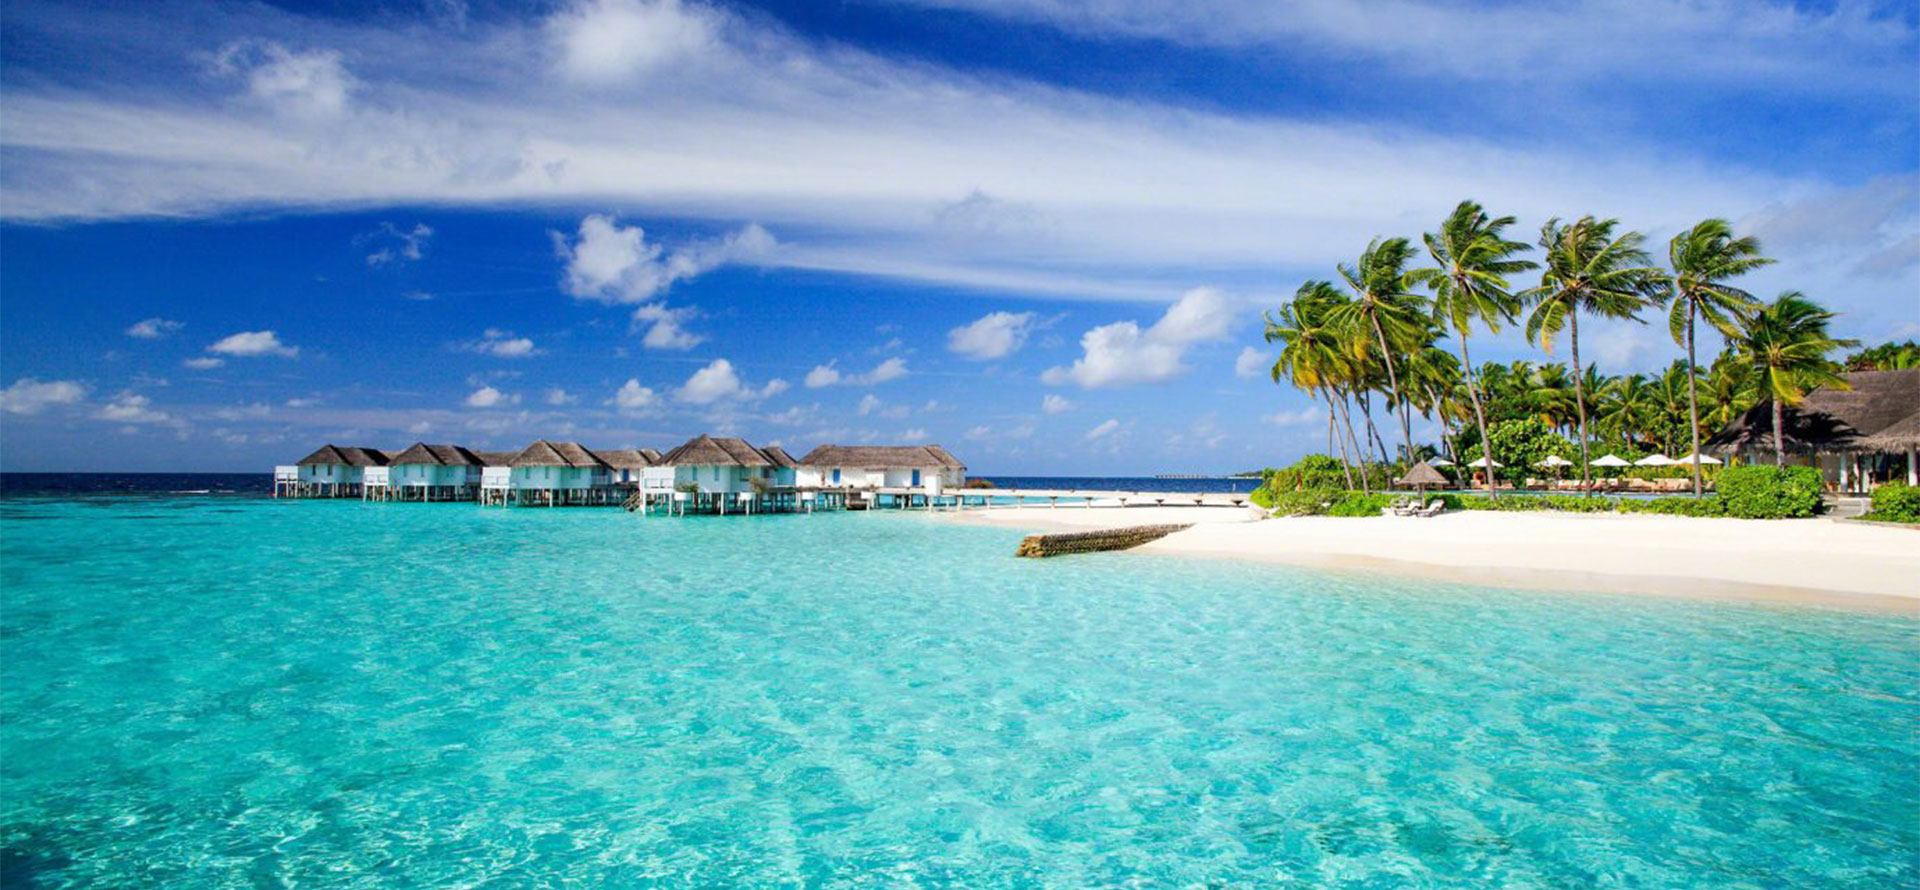 Maldives all inclusive resort and bungalows.